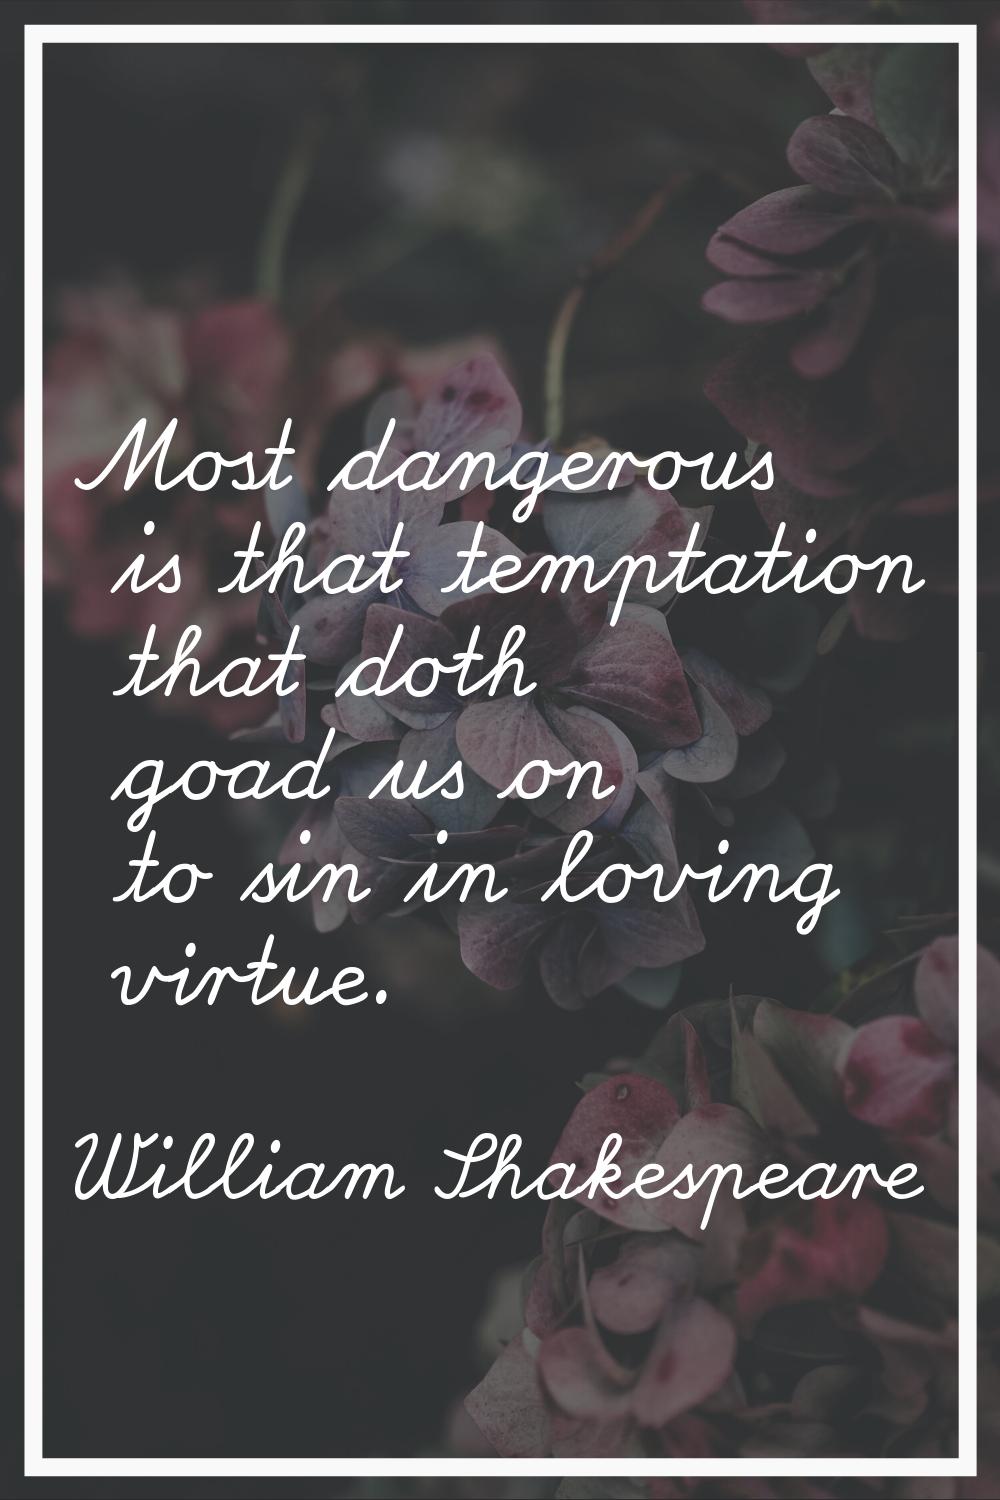 Most dangerous is that temptation that doth goad us on to sin in loving virtue.